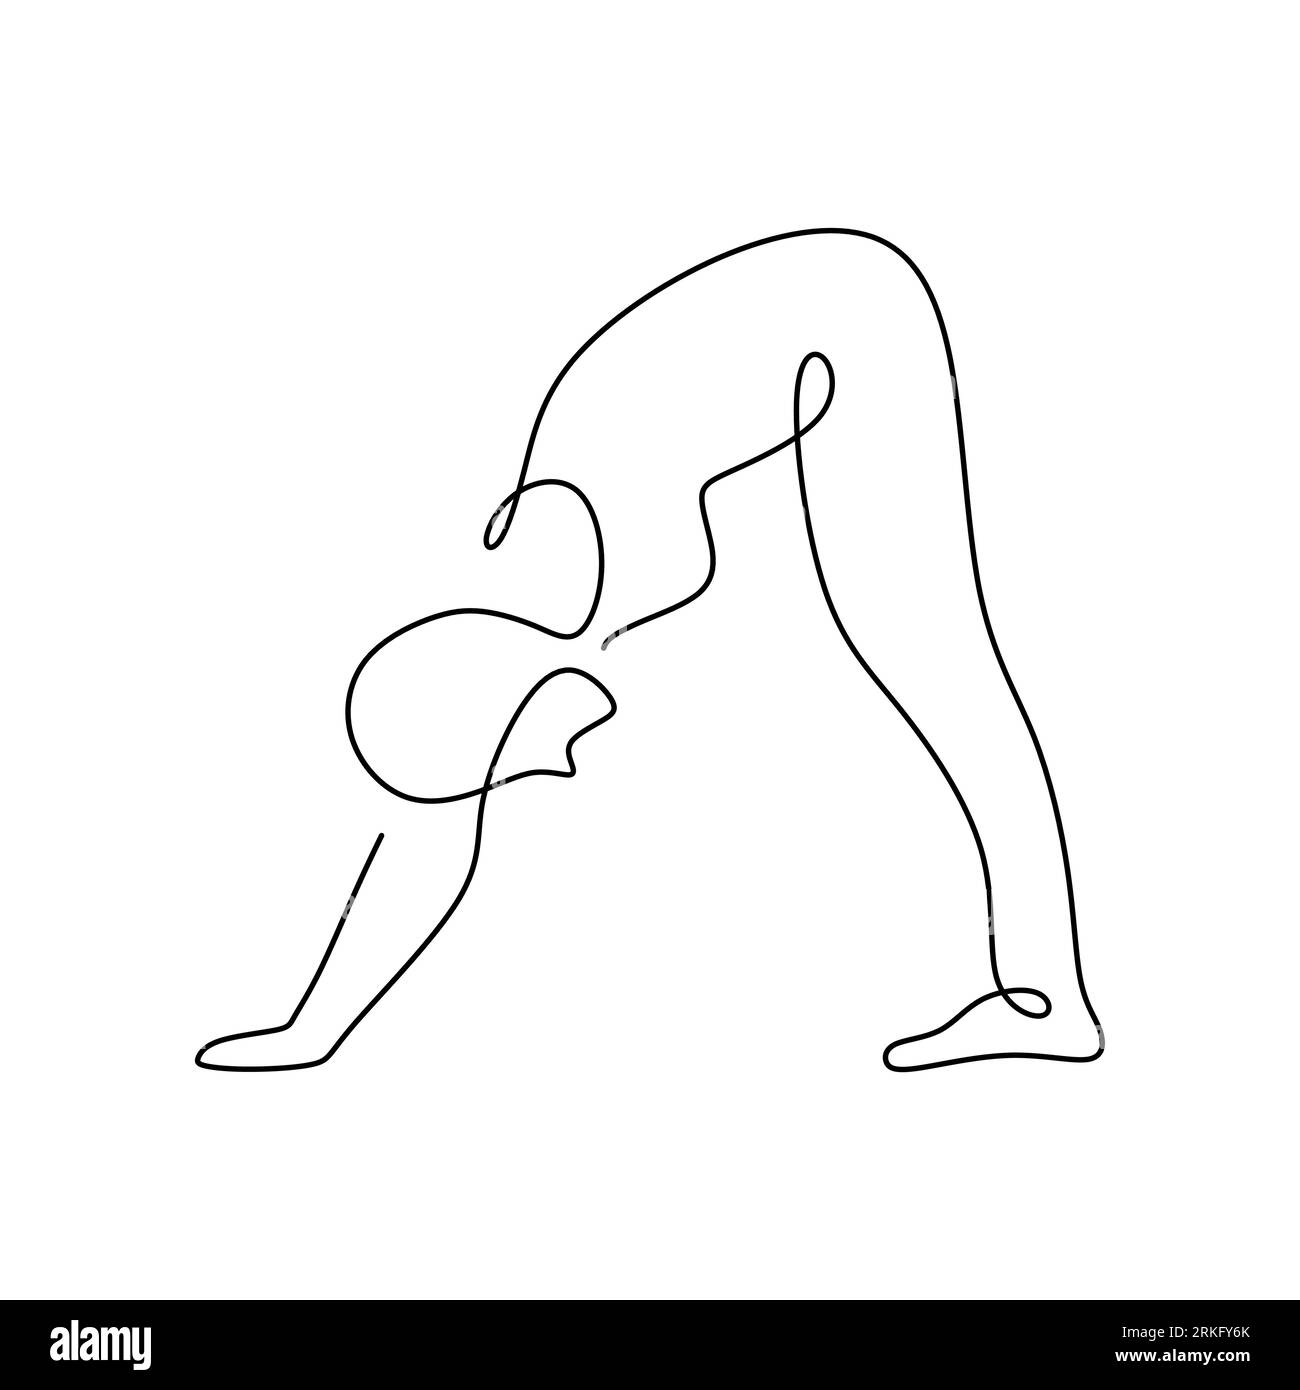 Woman doing yoga pose. Continuous one line drawing of energetic girl practice Downward Dog yoga exercise pose. Character female in warrior pose isolat Stock Vector